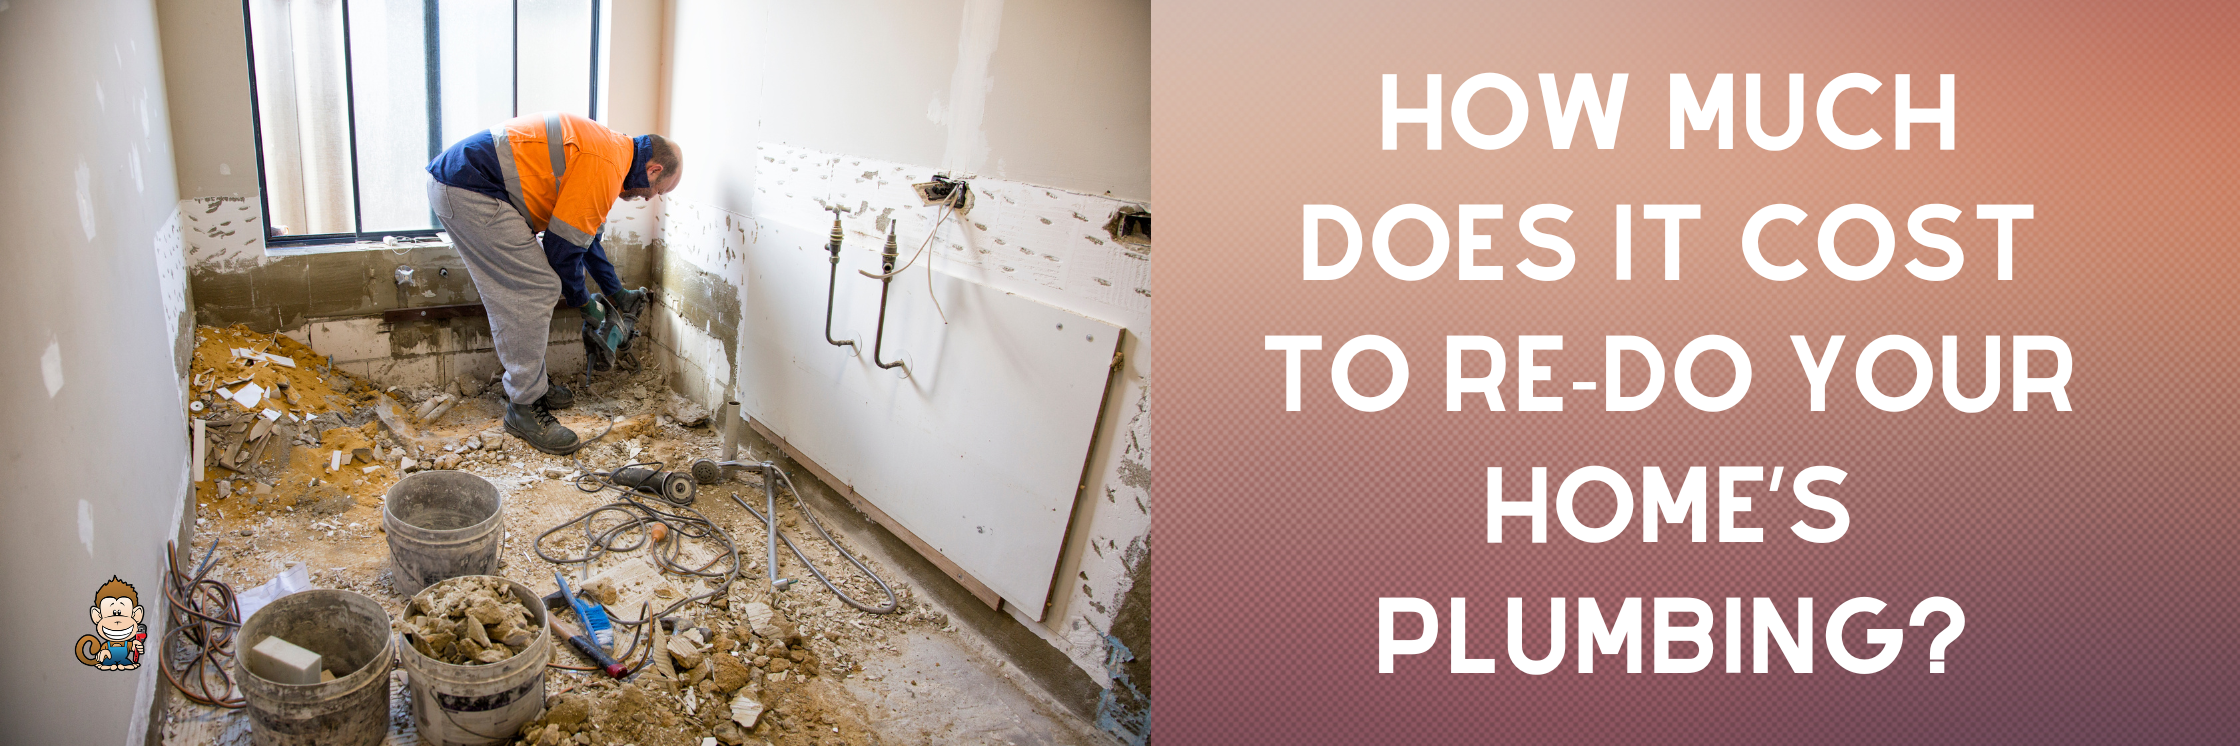 How Much Does It Cost to Re-do Your Home’s Plumbing?